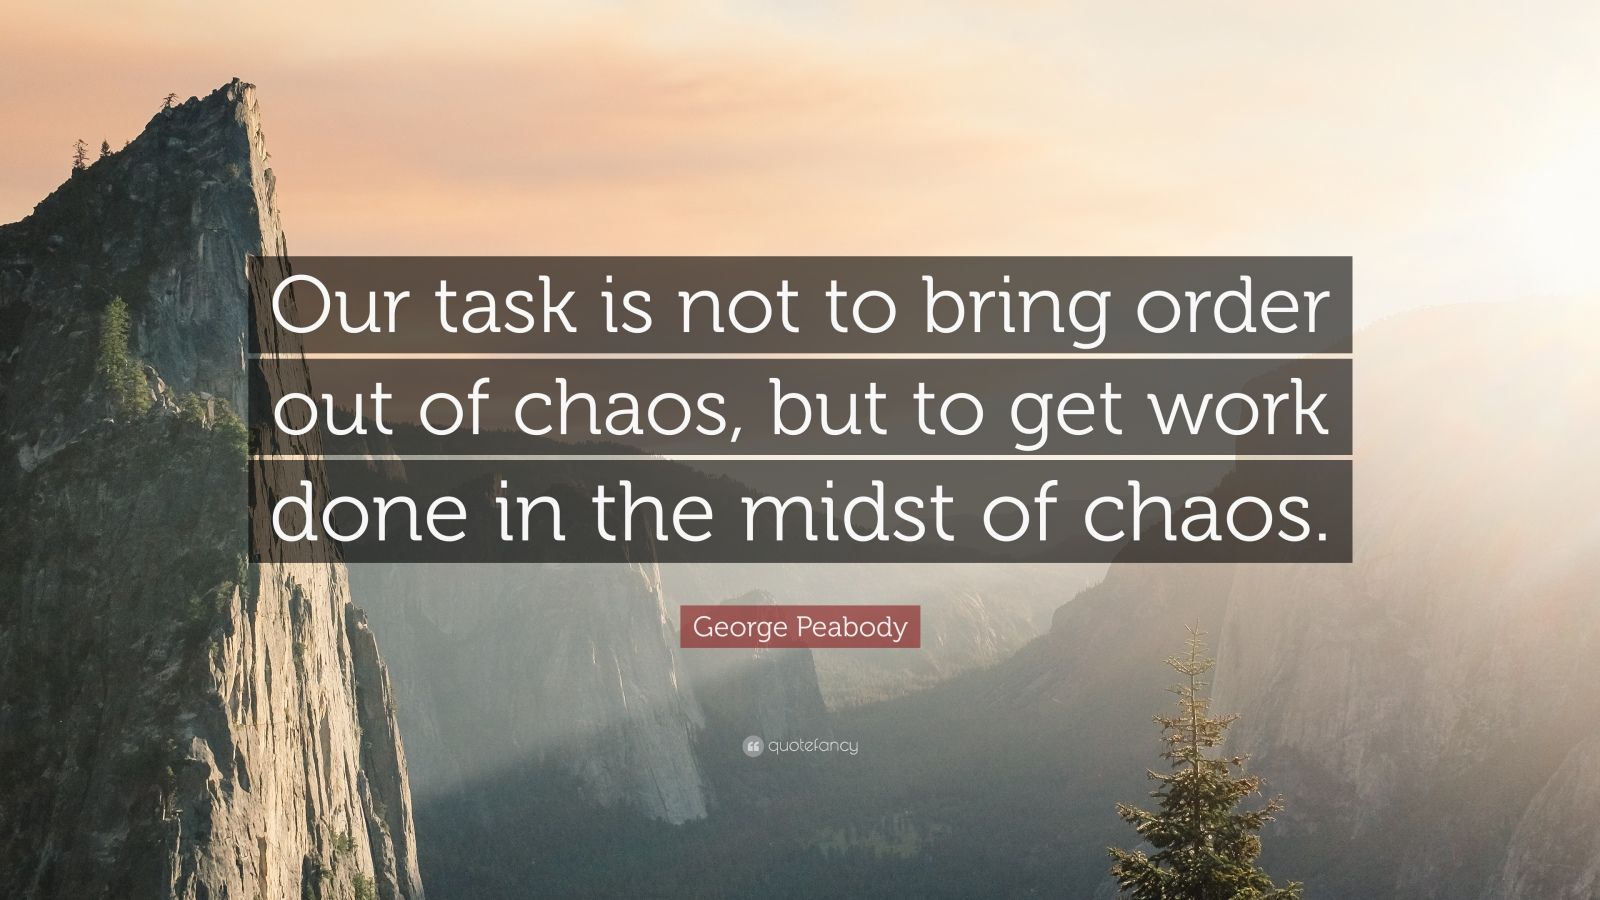 George Peabody Quote: “Our task is not to bring order out of chaos, but